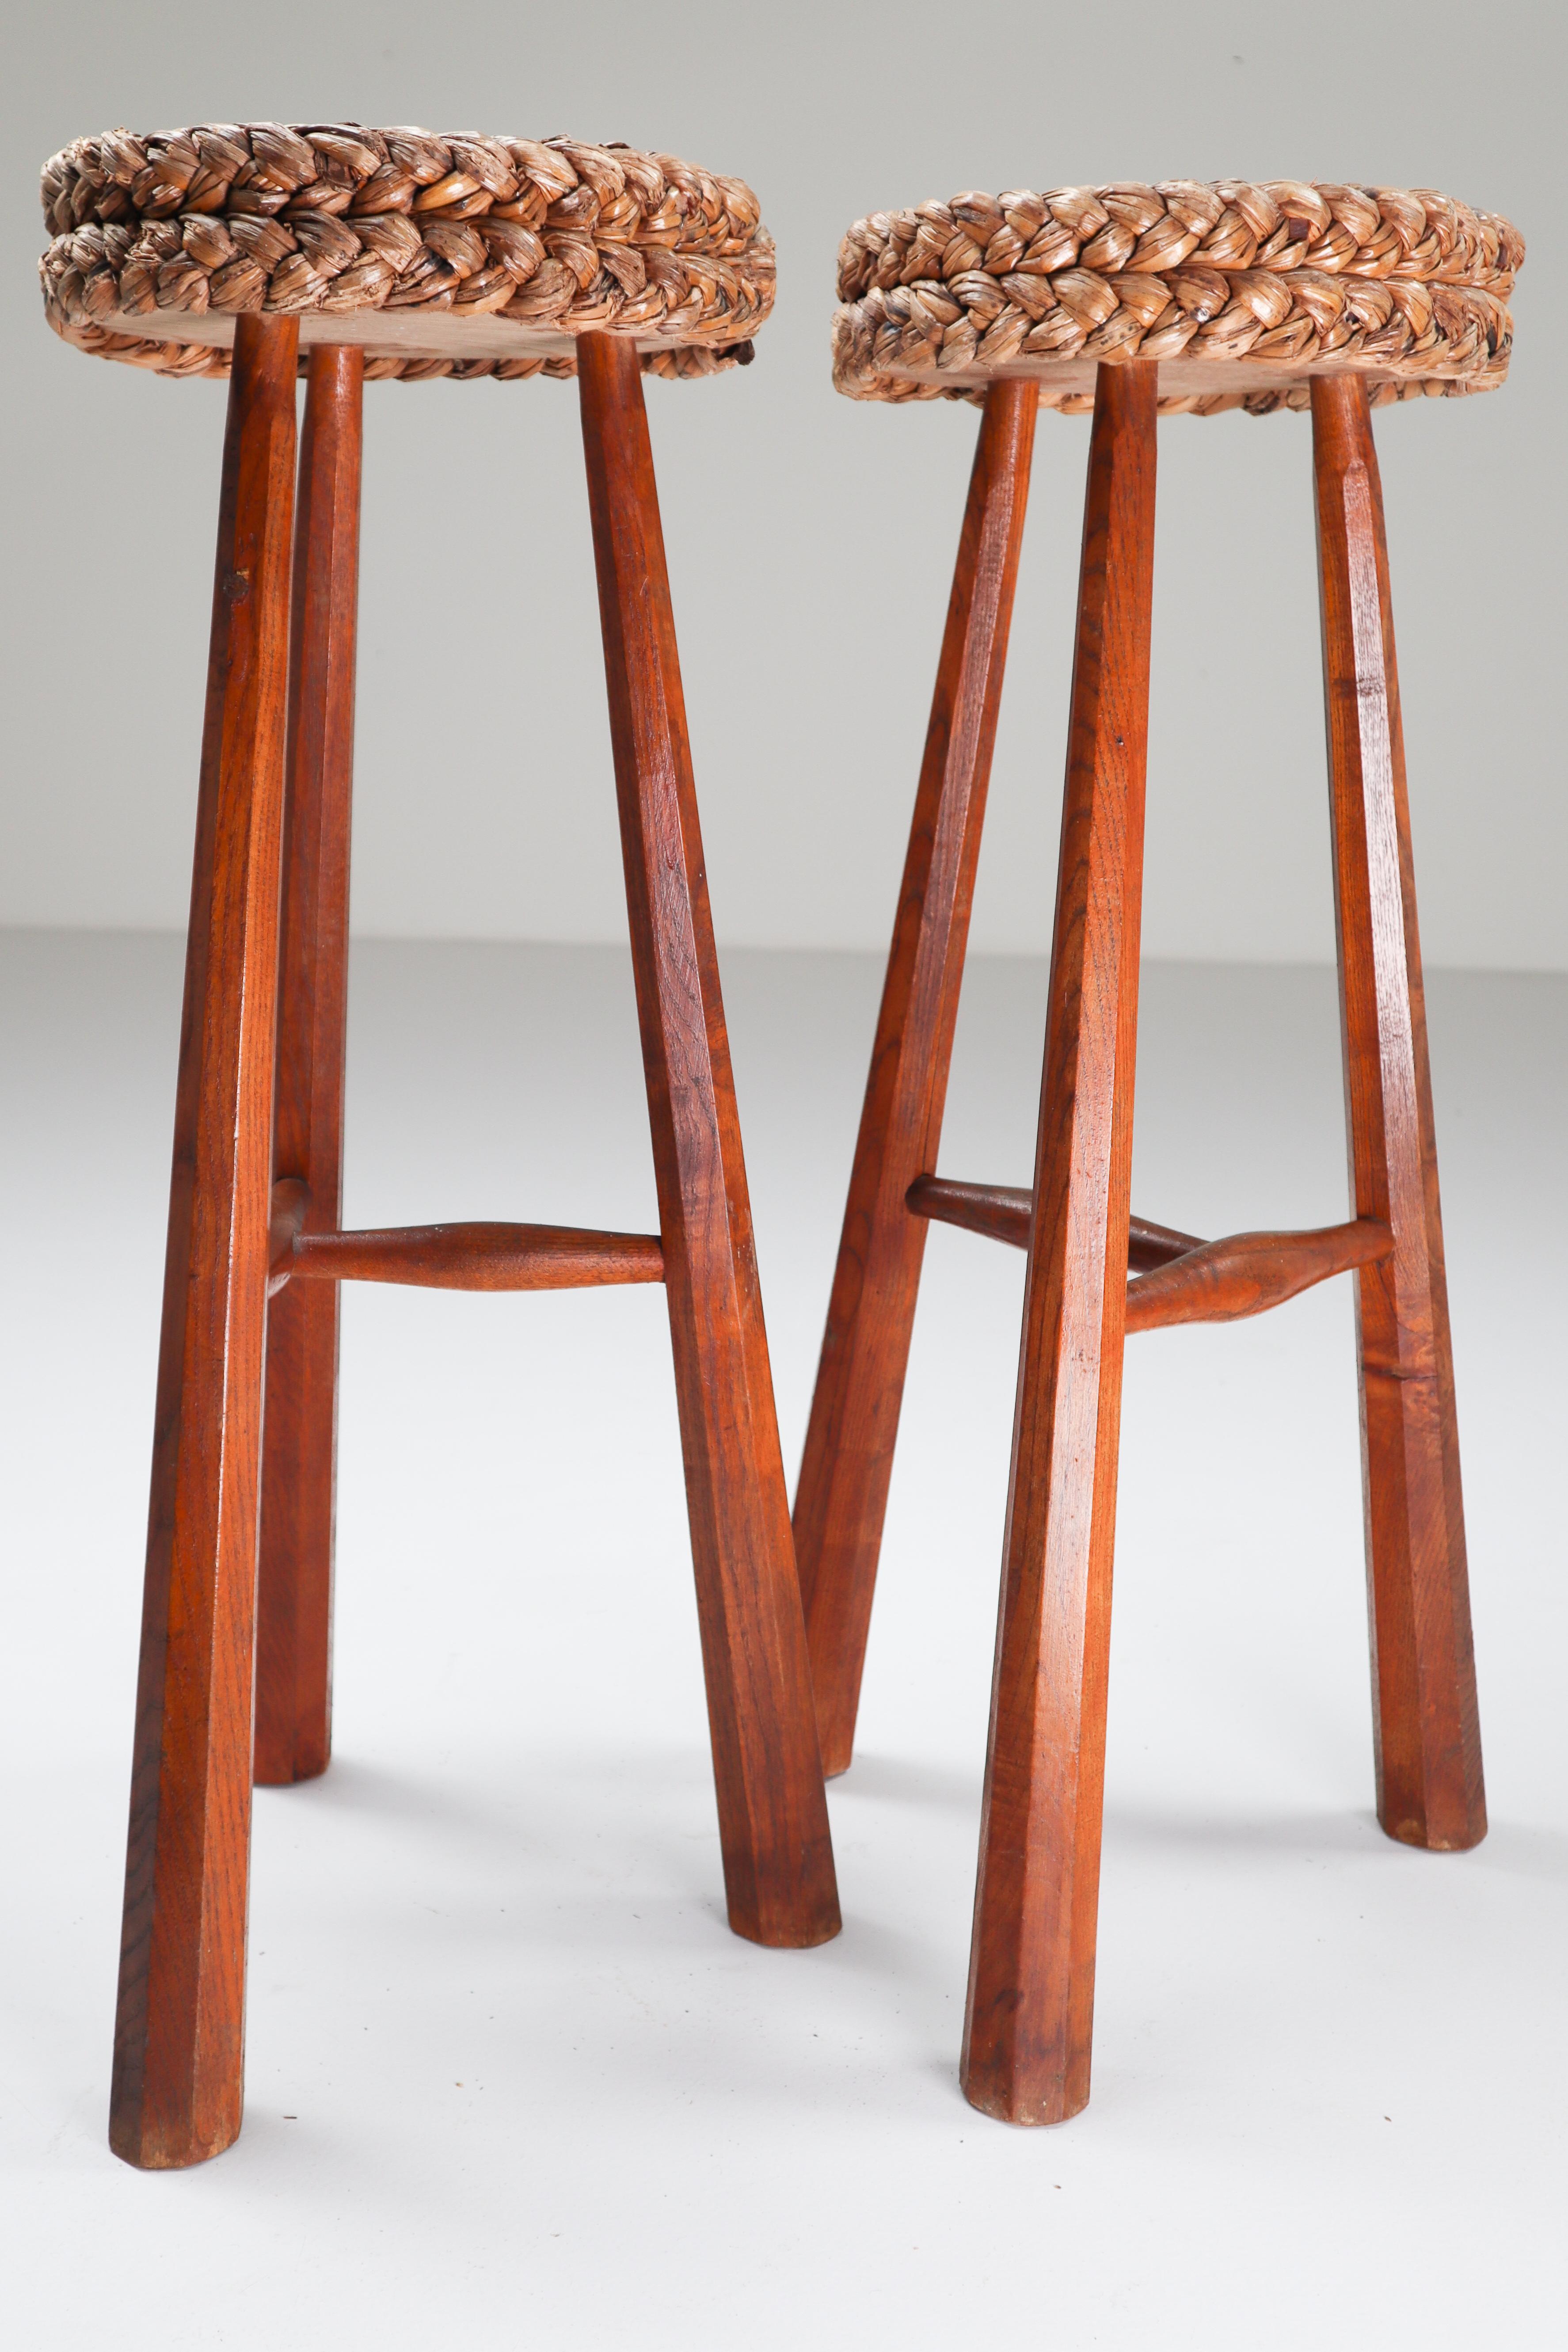 20th Century Two Bar Stools by Adrien Audoux & Frida Minet, France, 1950s